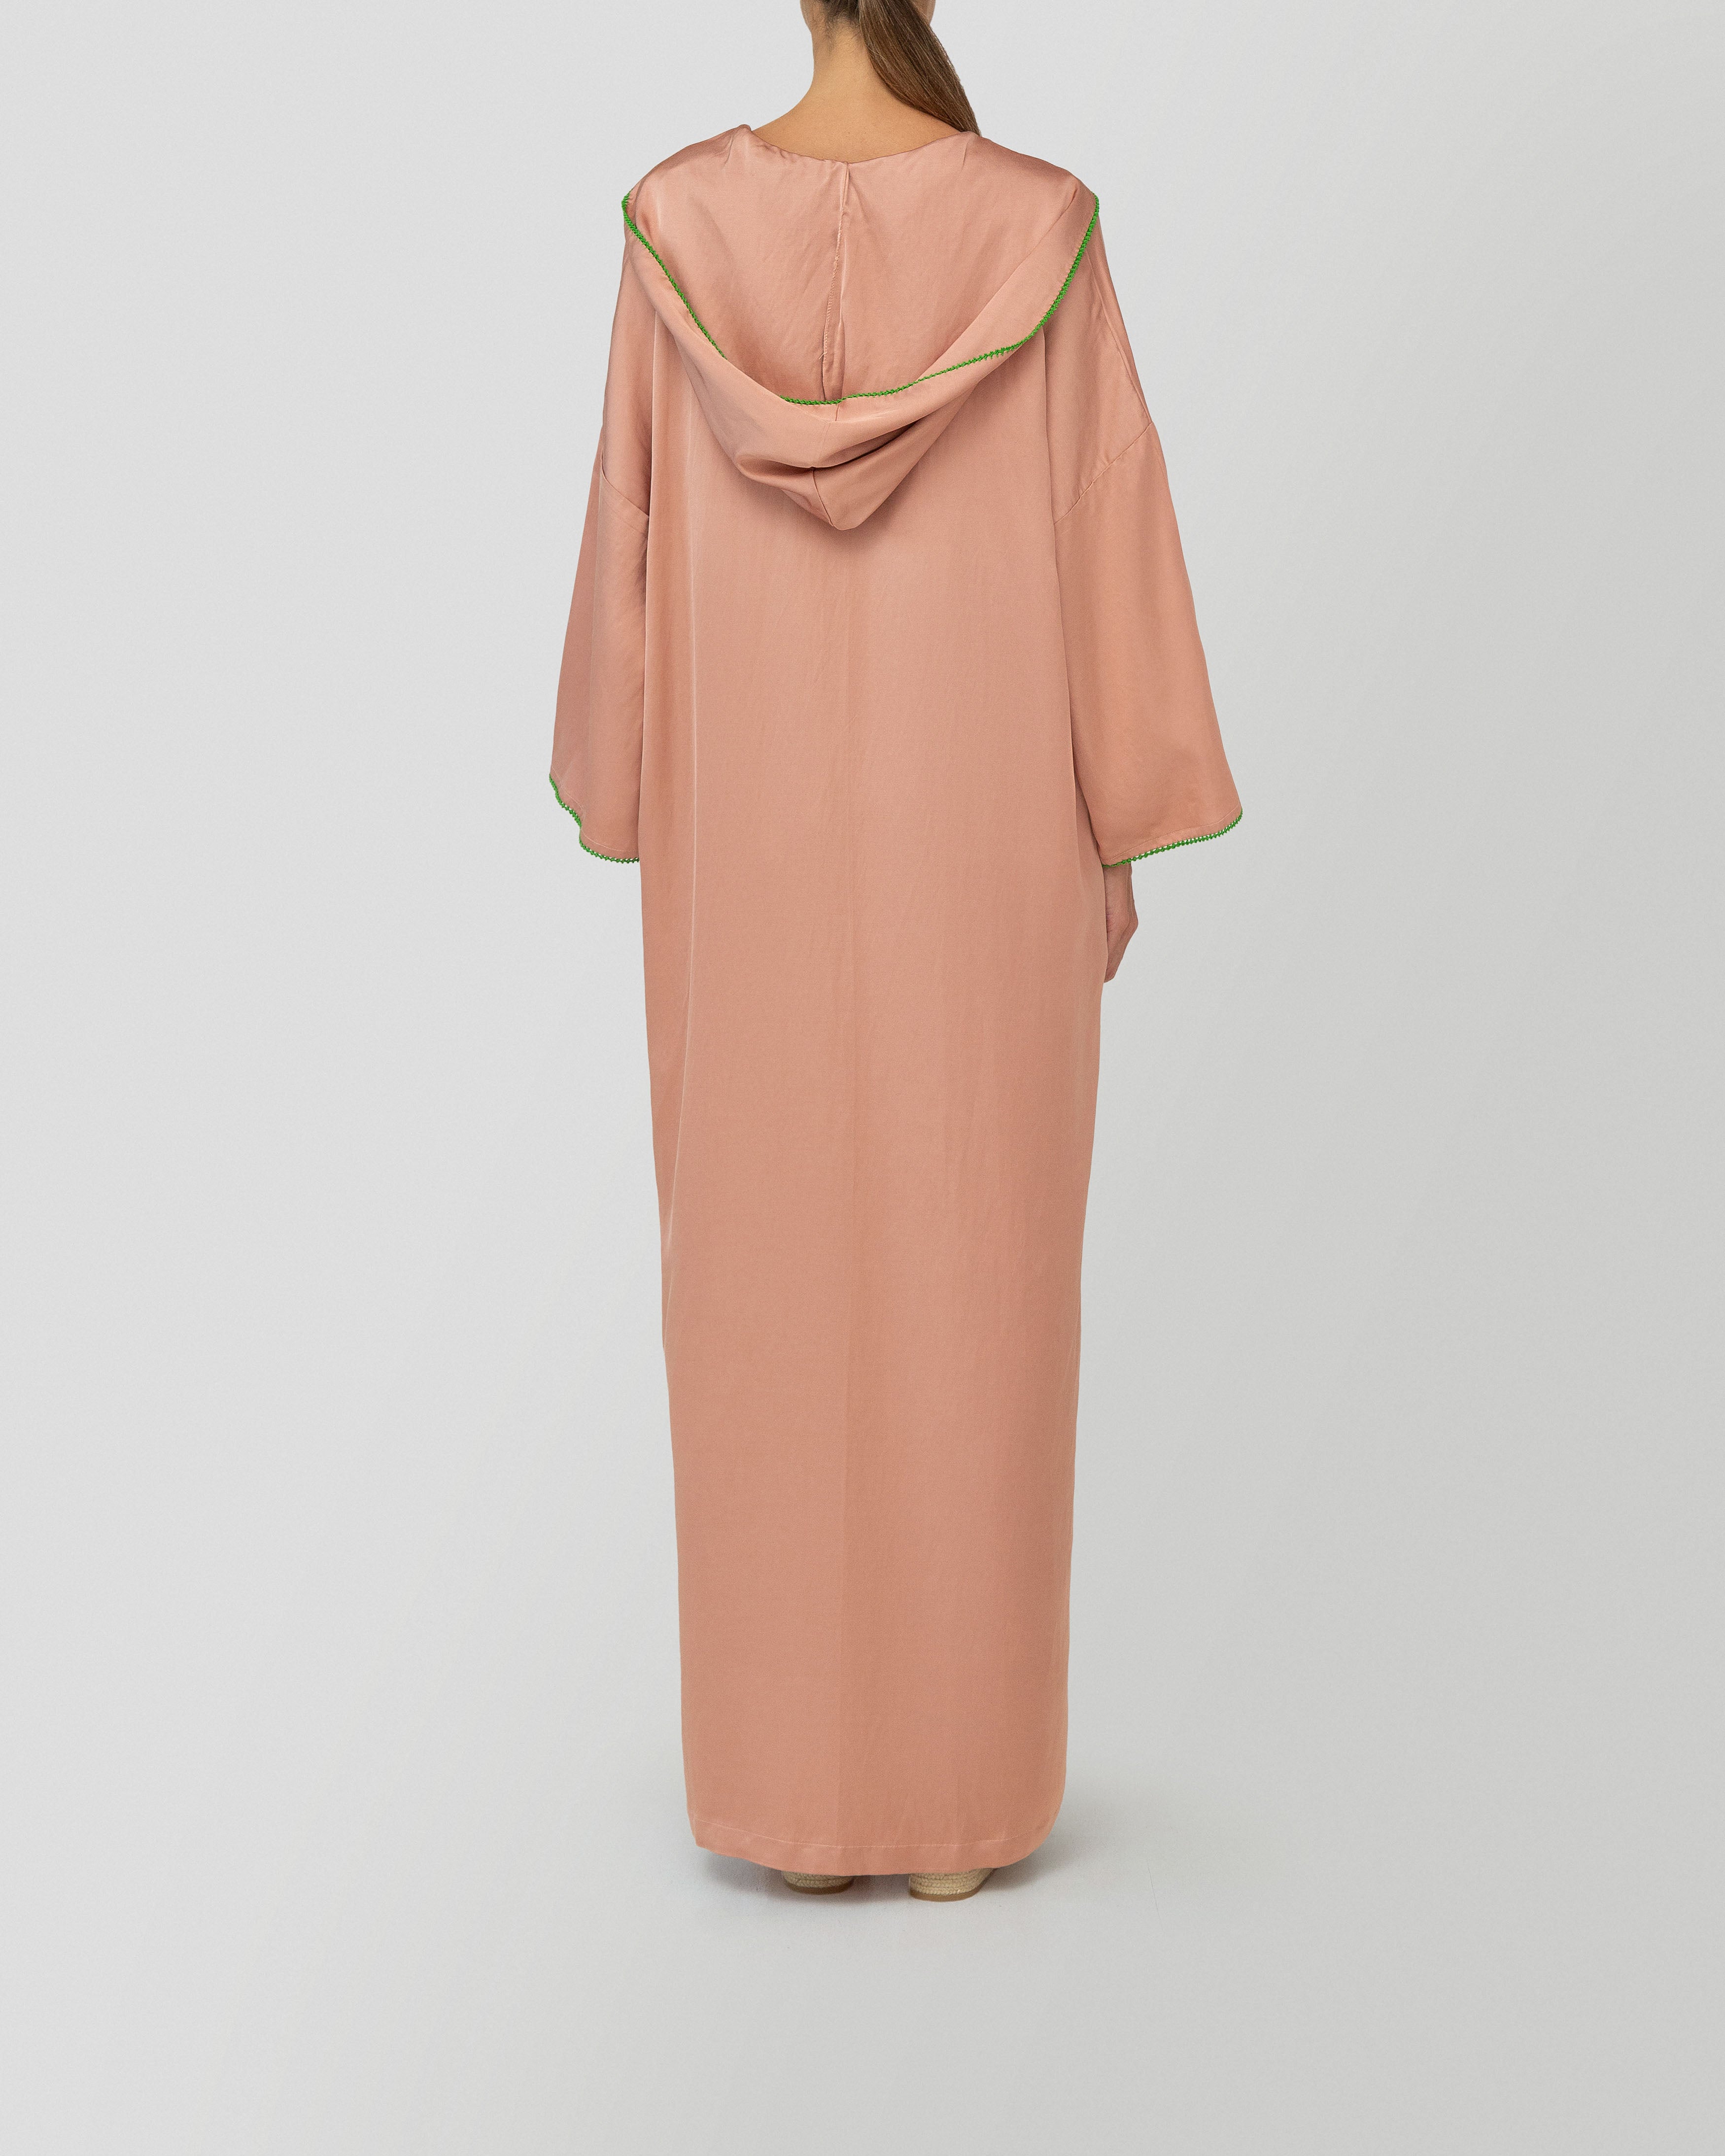 Manel Dress in Apricot